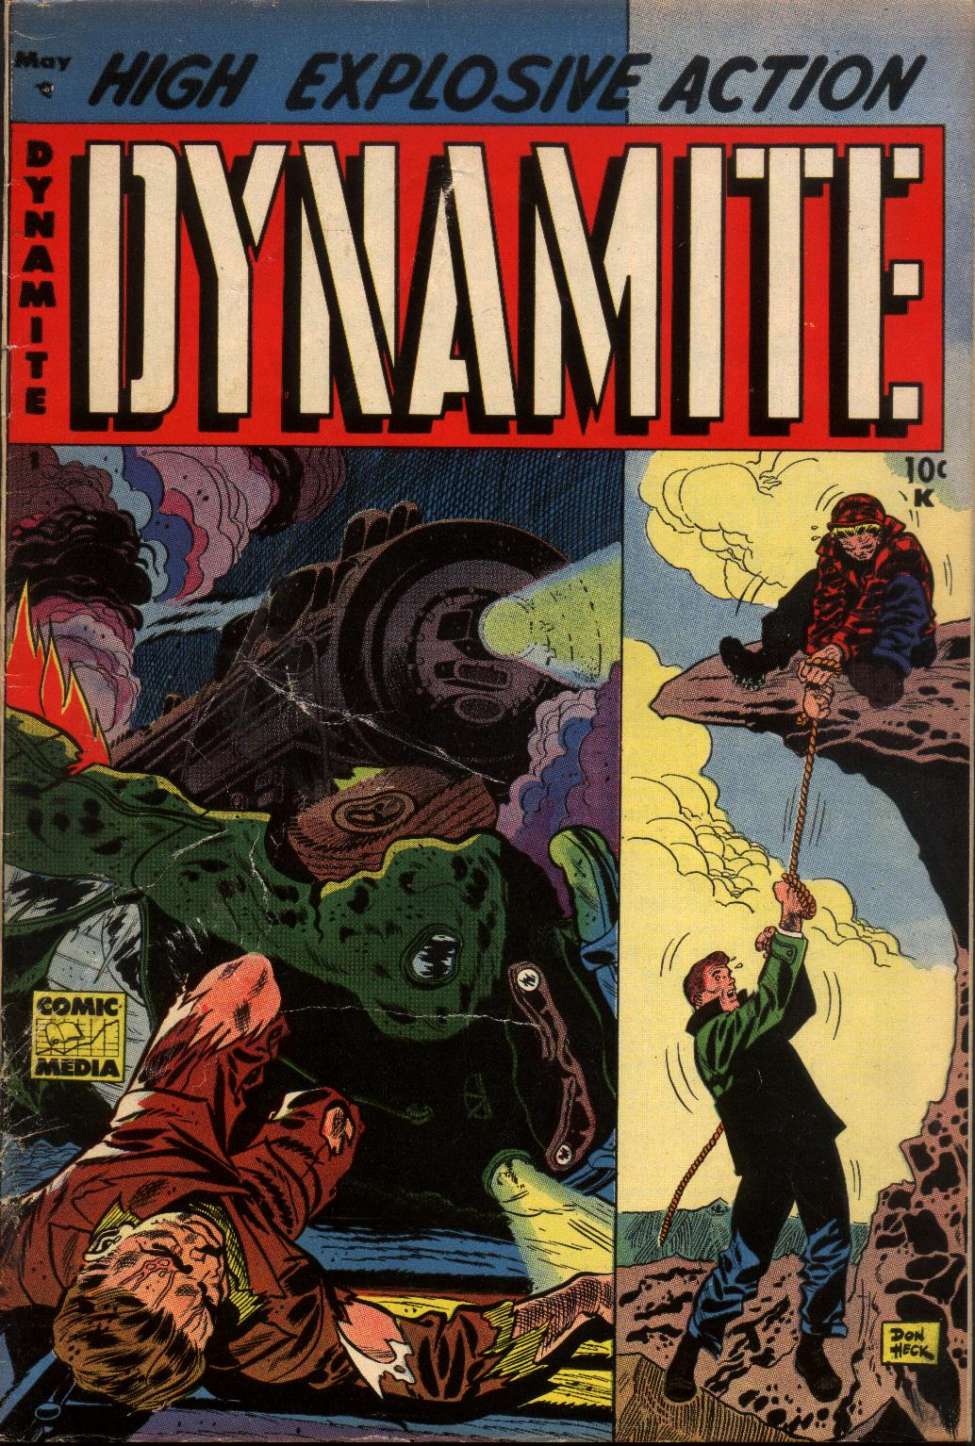 Book Cover For Dynamite 1